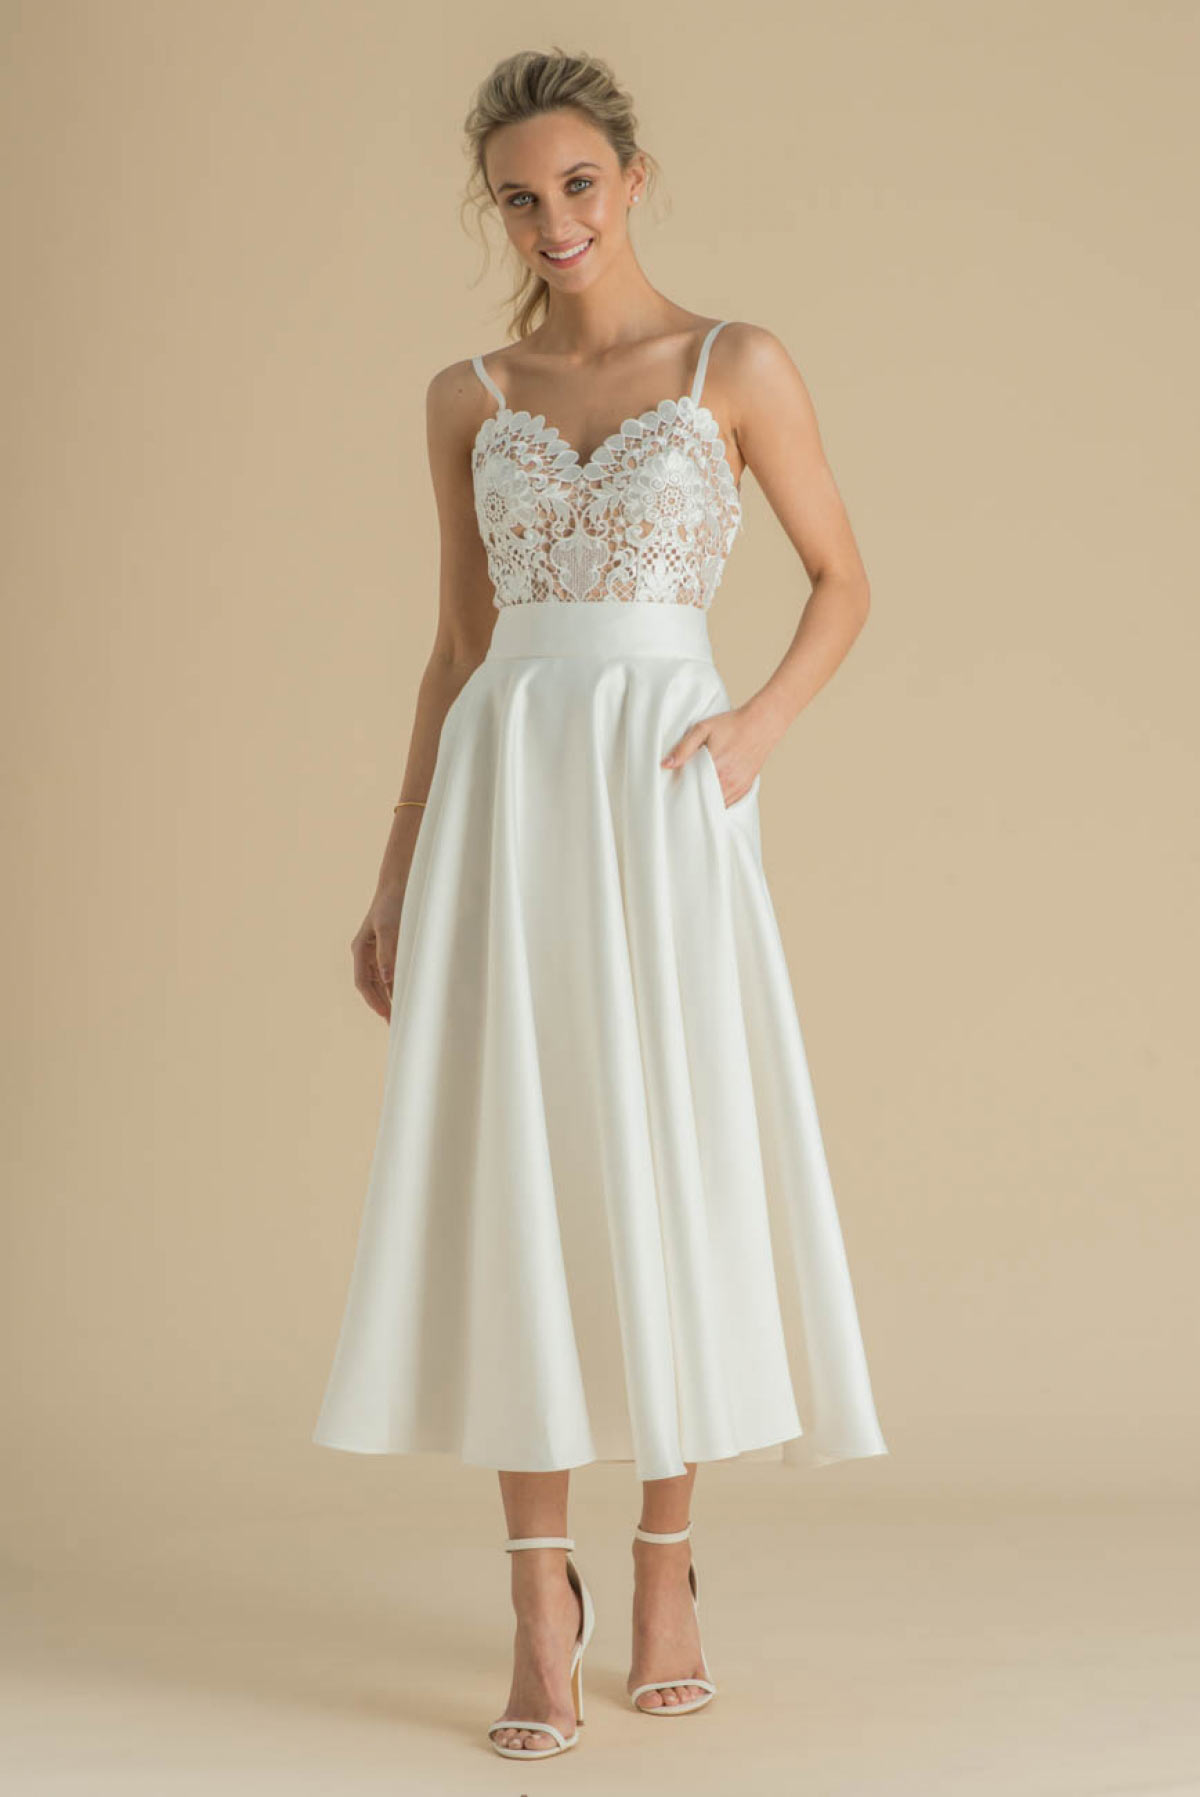 Gorgeous gowns at The Ivory Secret